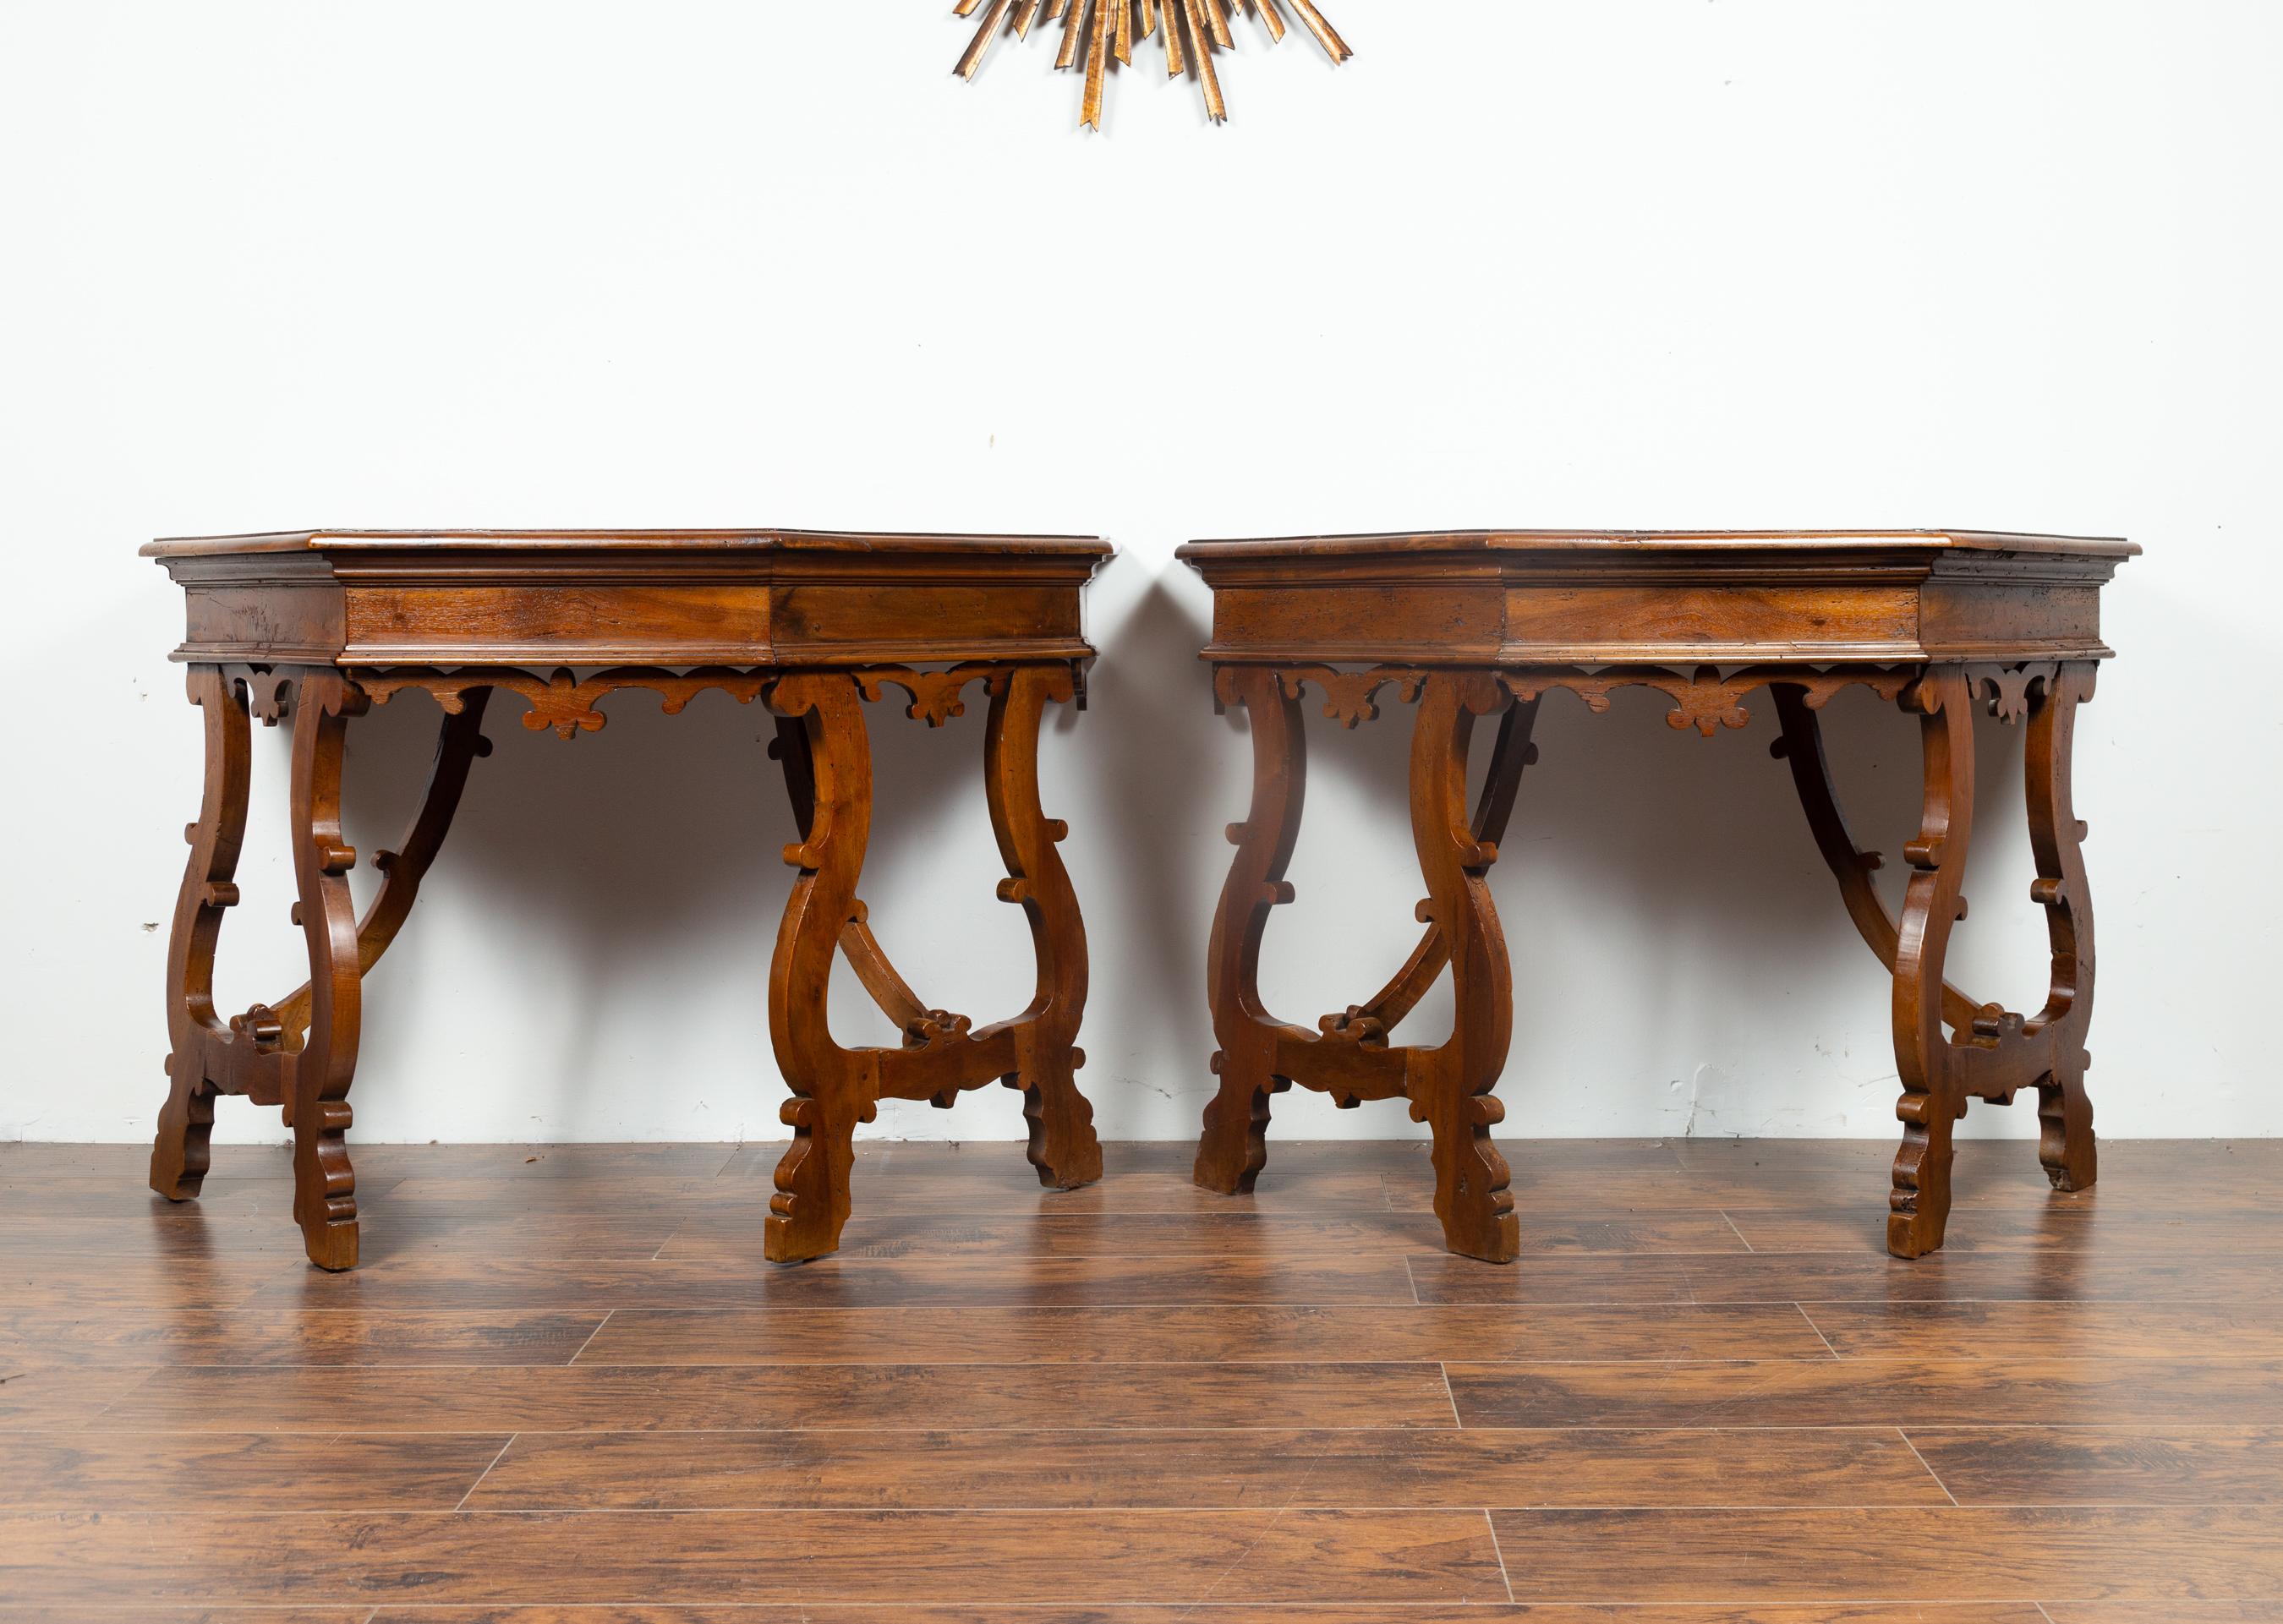 19th Century Pair of Italian mid 1800's Walnut Demi lune Tables with Lyre Shaped Legs